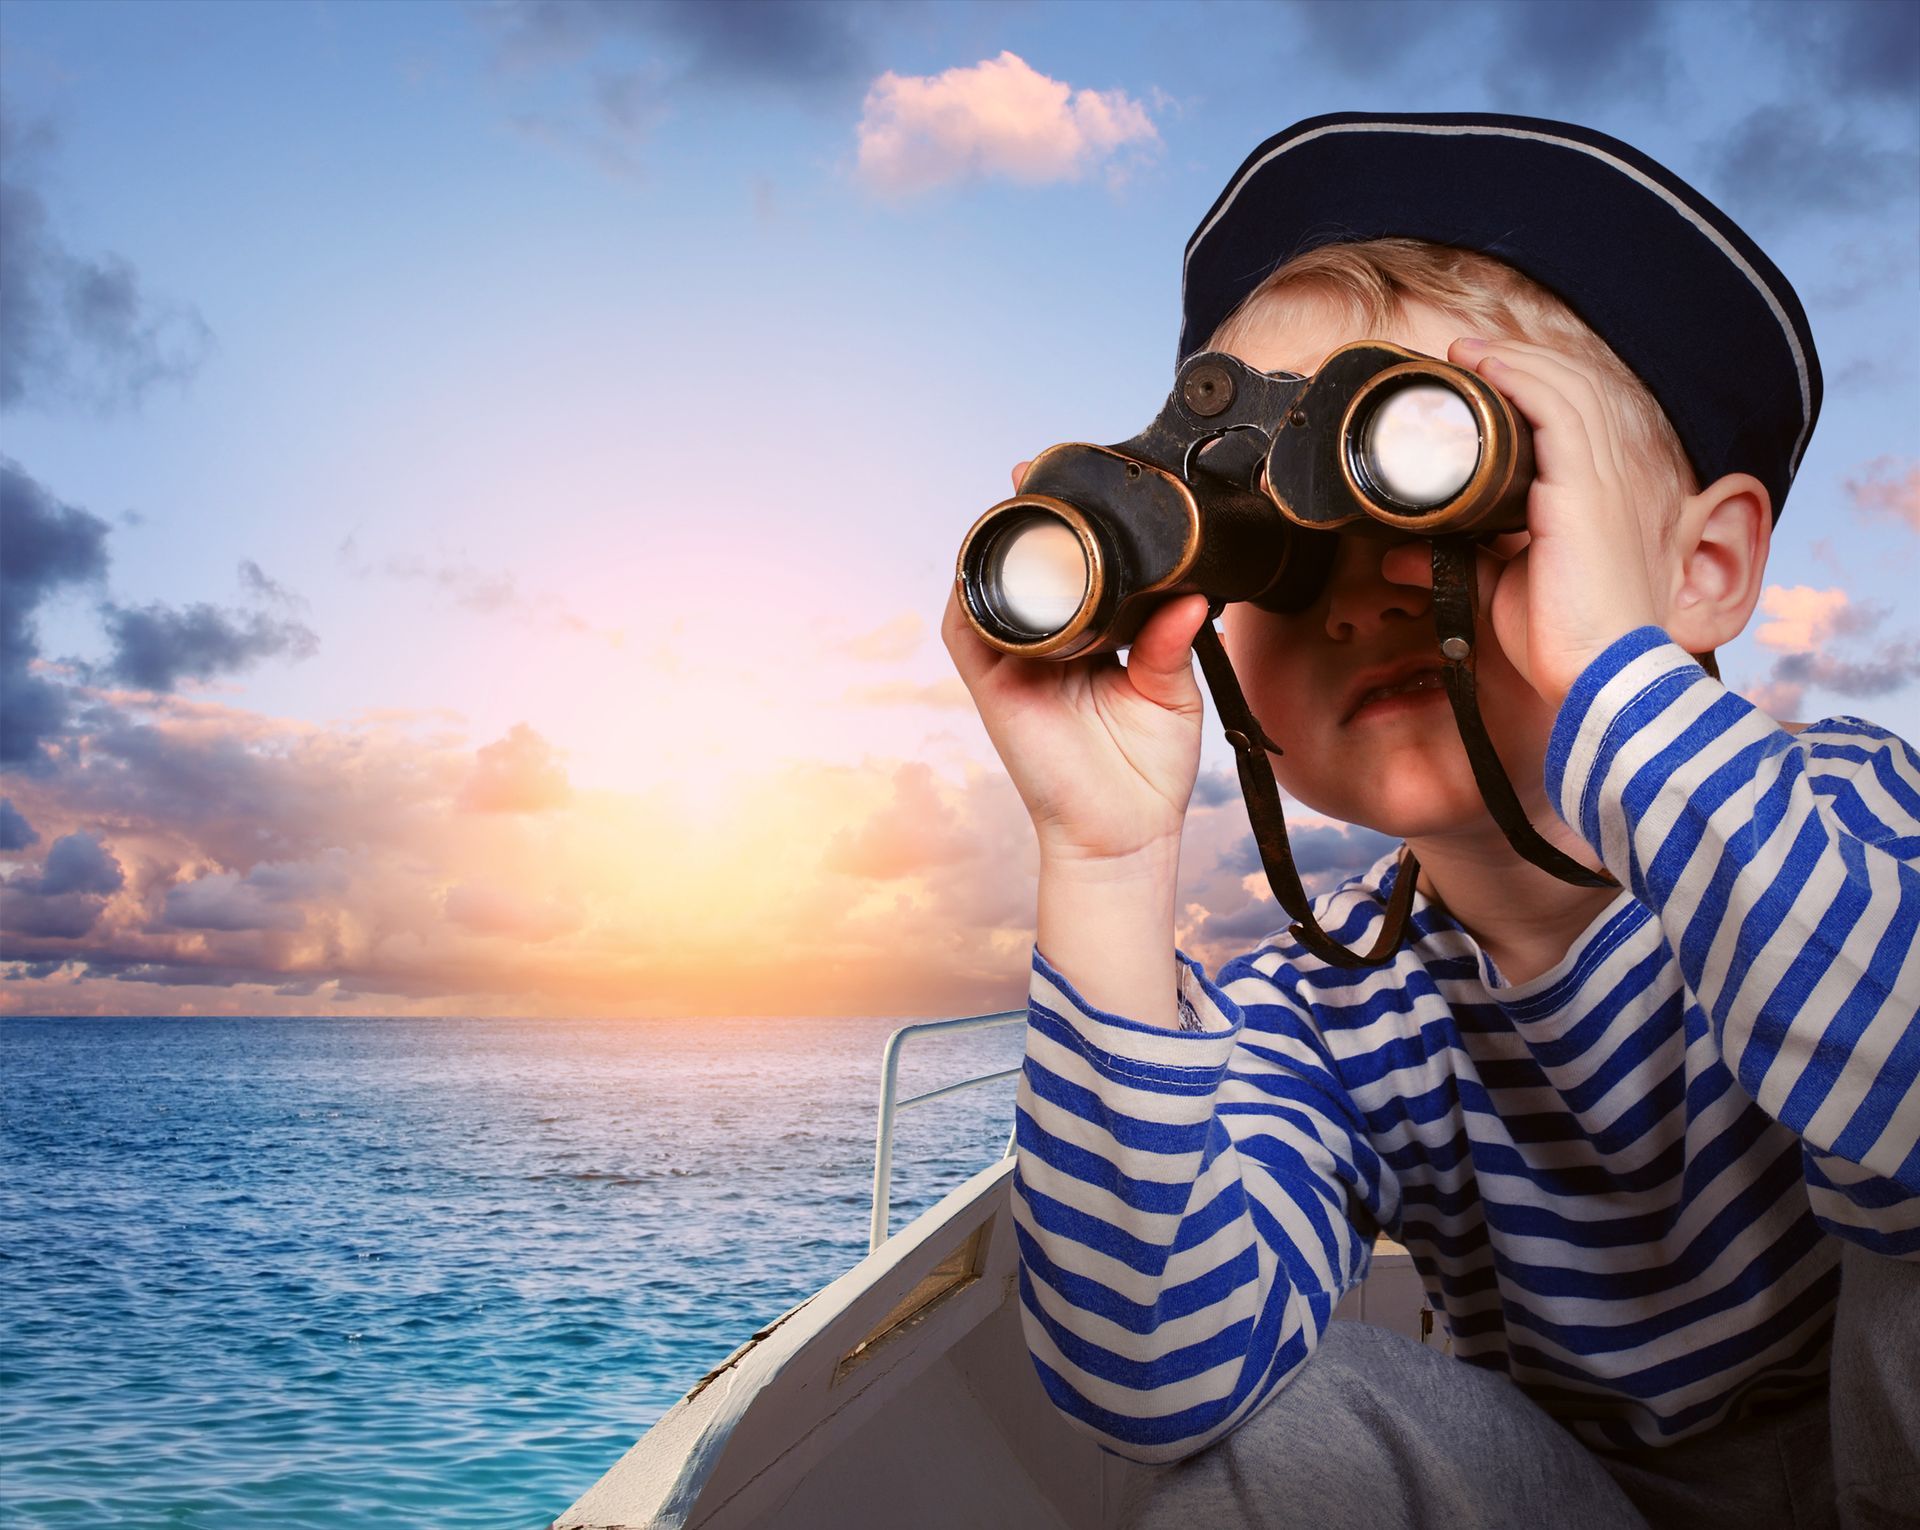 Boy dressed as a sailor with a striped shirt and cap looking through binoculars